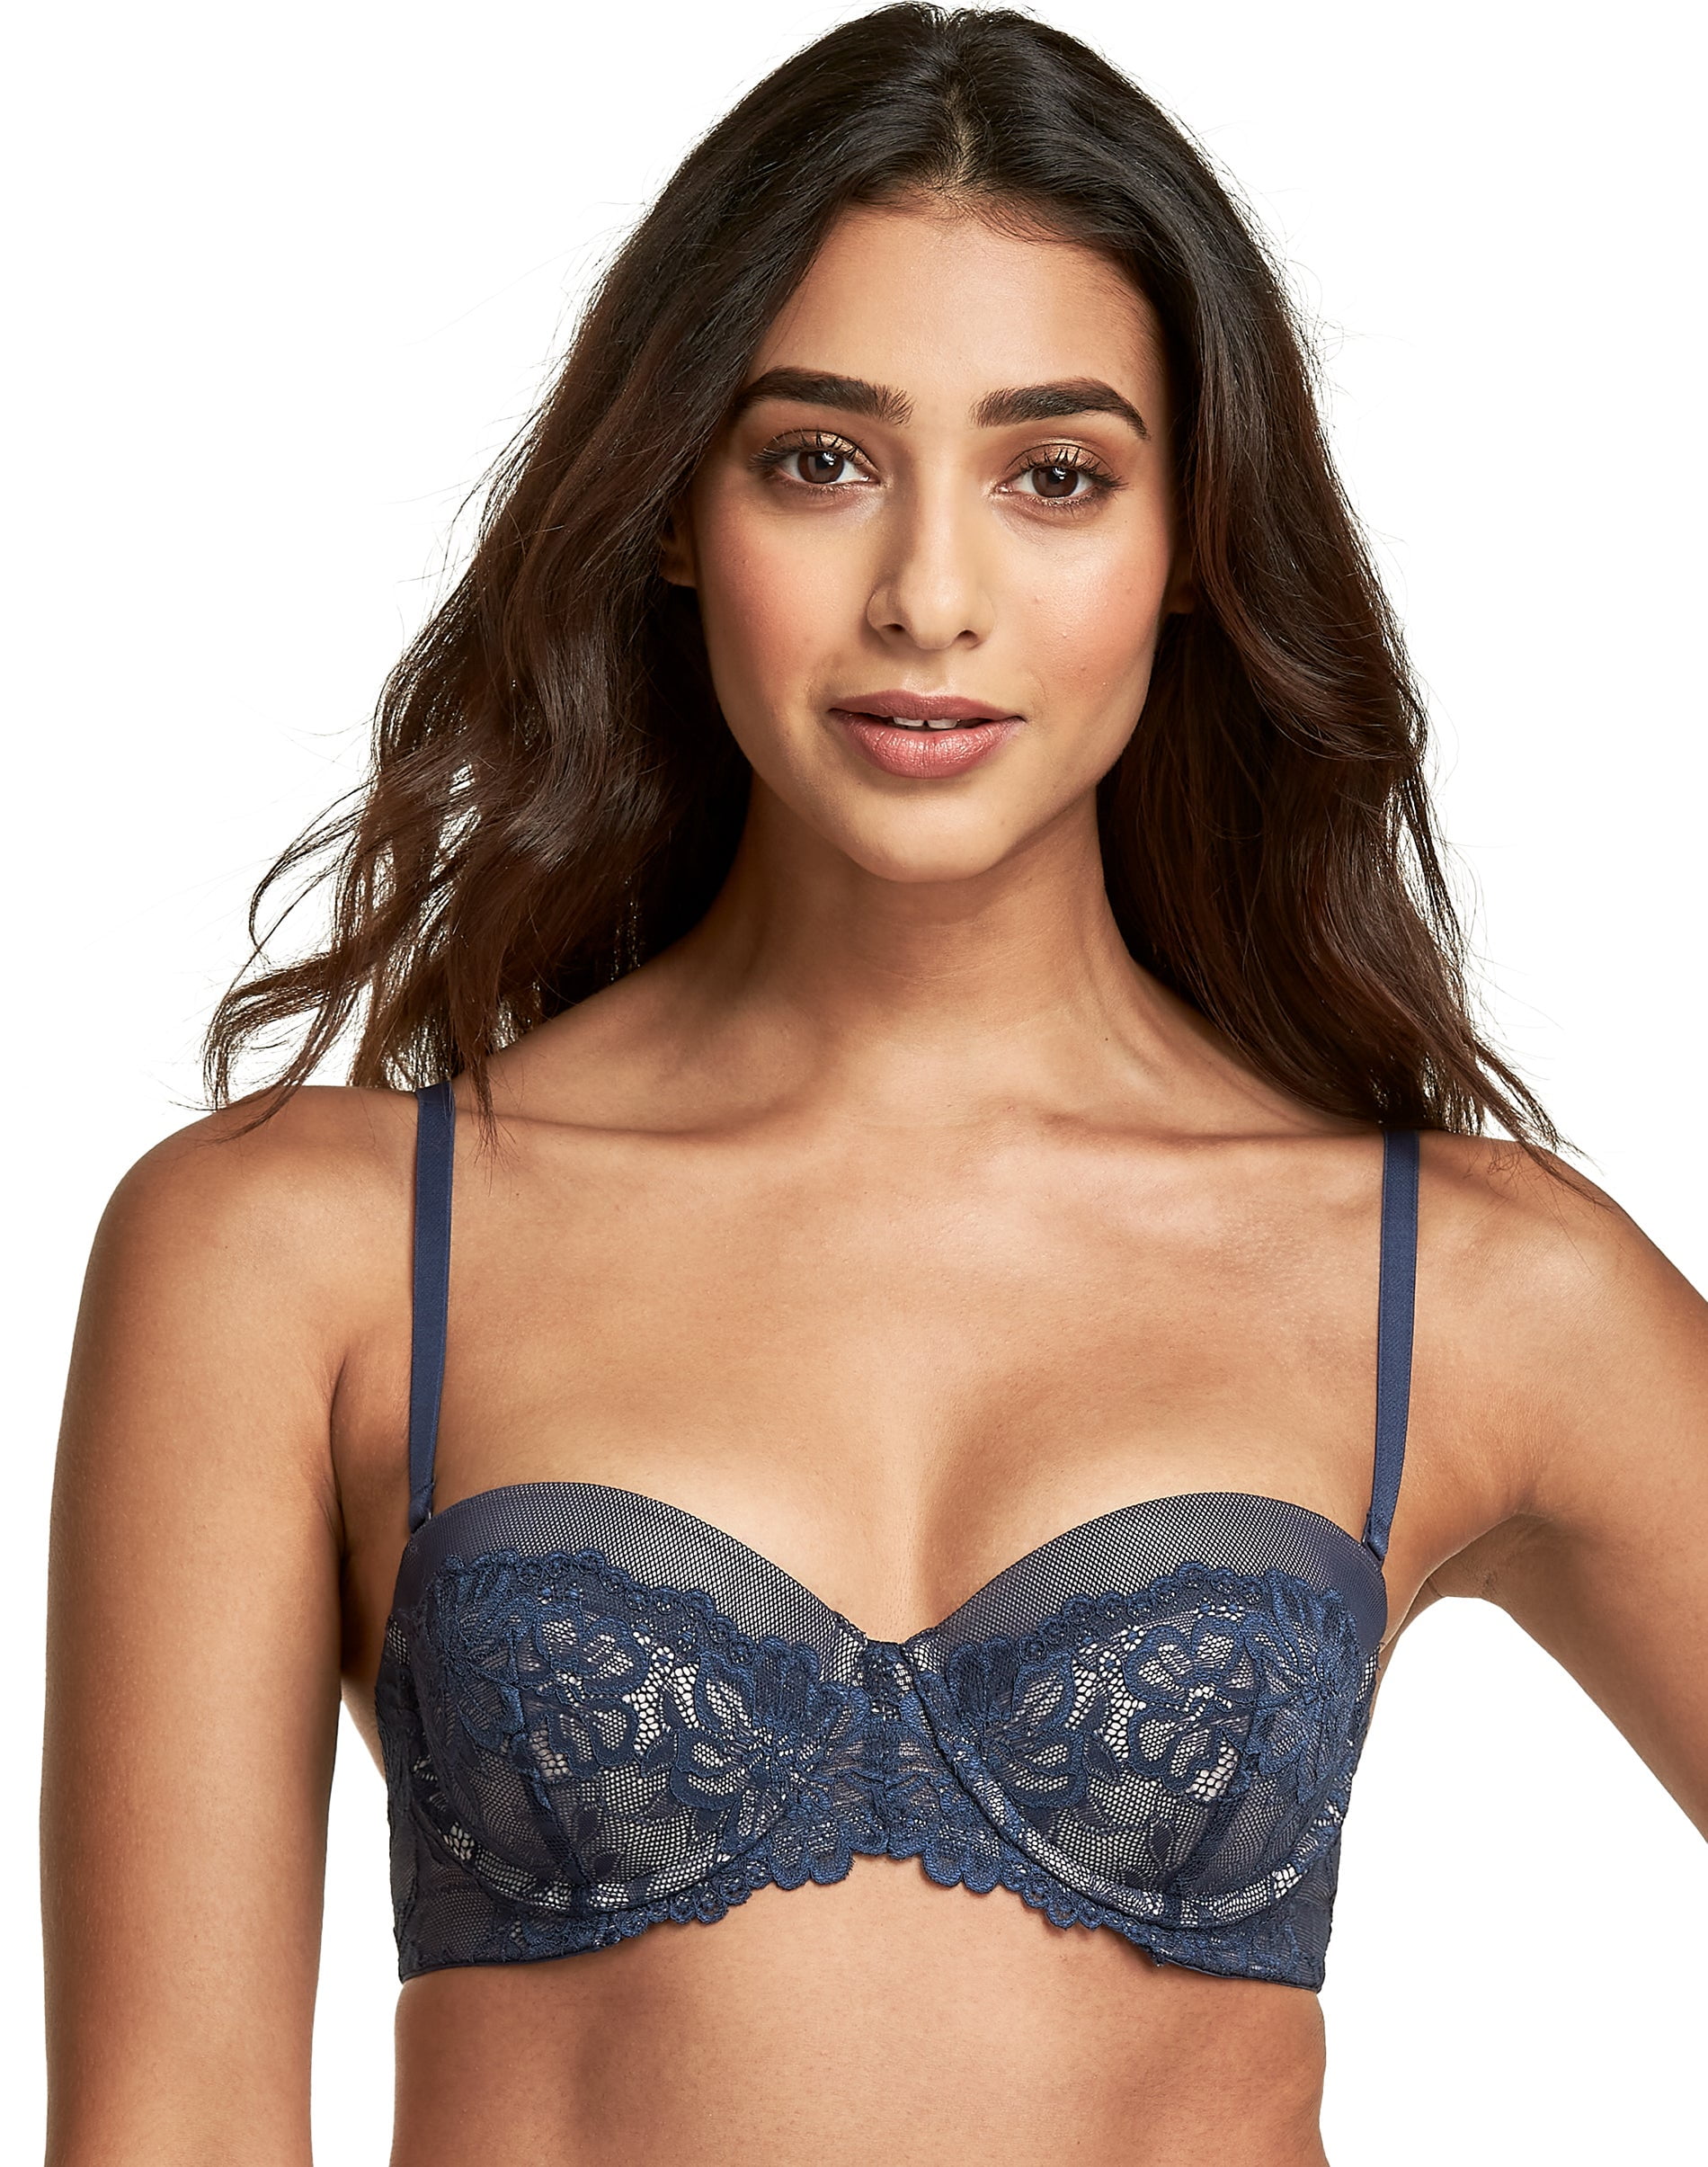 Malabis Lingerie Ltd - Sister sizes. Did you know that 34F 36E. 32FF. 30G  all have the same cup size ( breast volume) but different band length (back  size). I.e : a